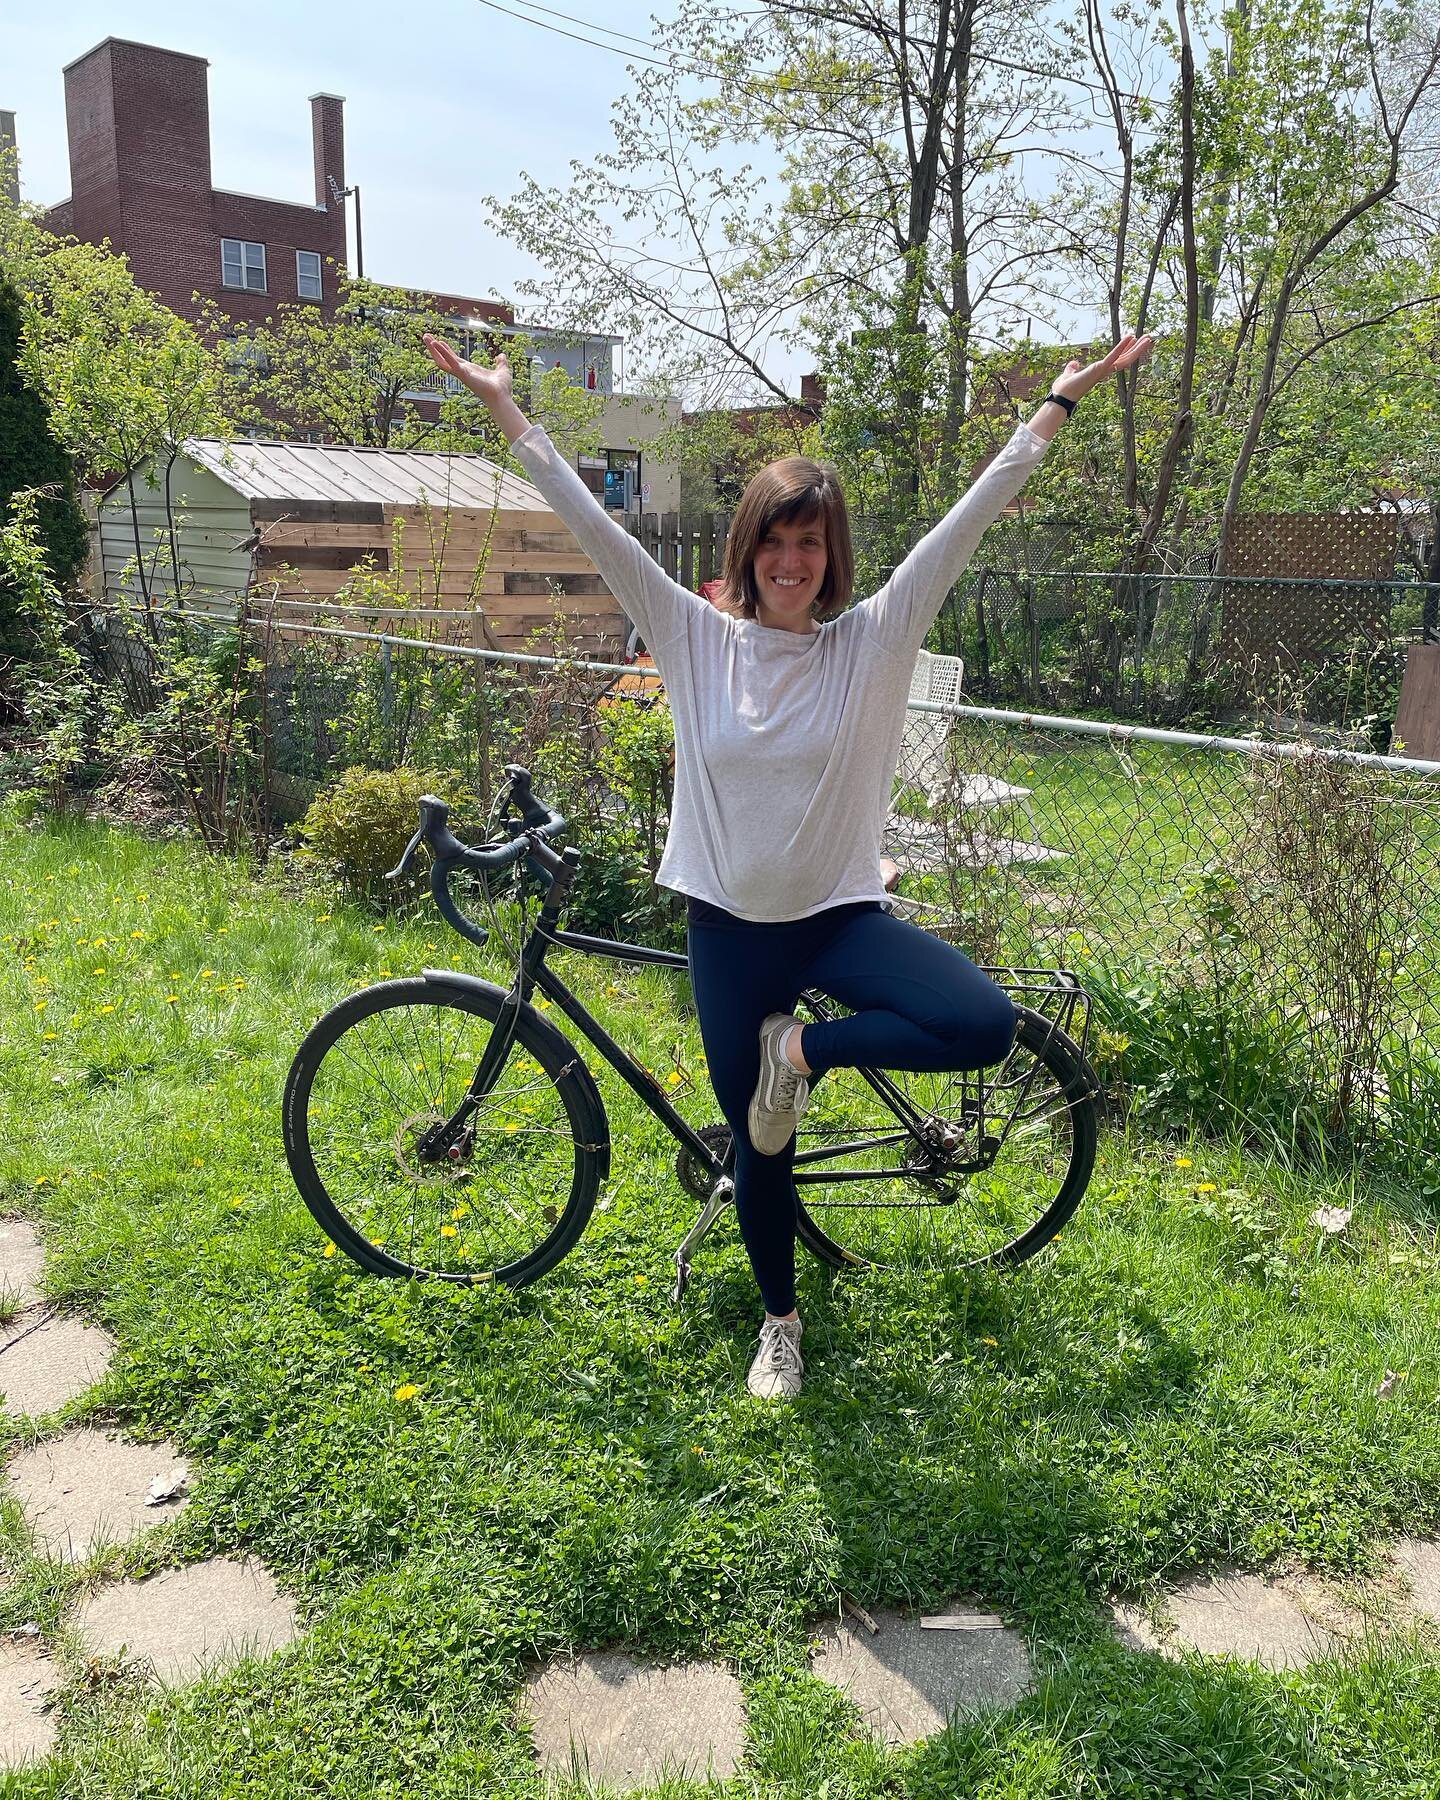 I am back!

On my bike ride home from my private client in downtown Montreal, I realised again how privileged and grateful I am to have chosen a job that has such a positive impact on my students and myself.&nbsp;
I really look forward to sharing my 